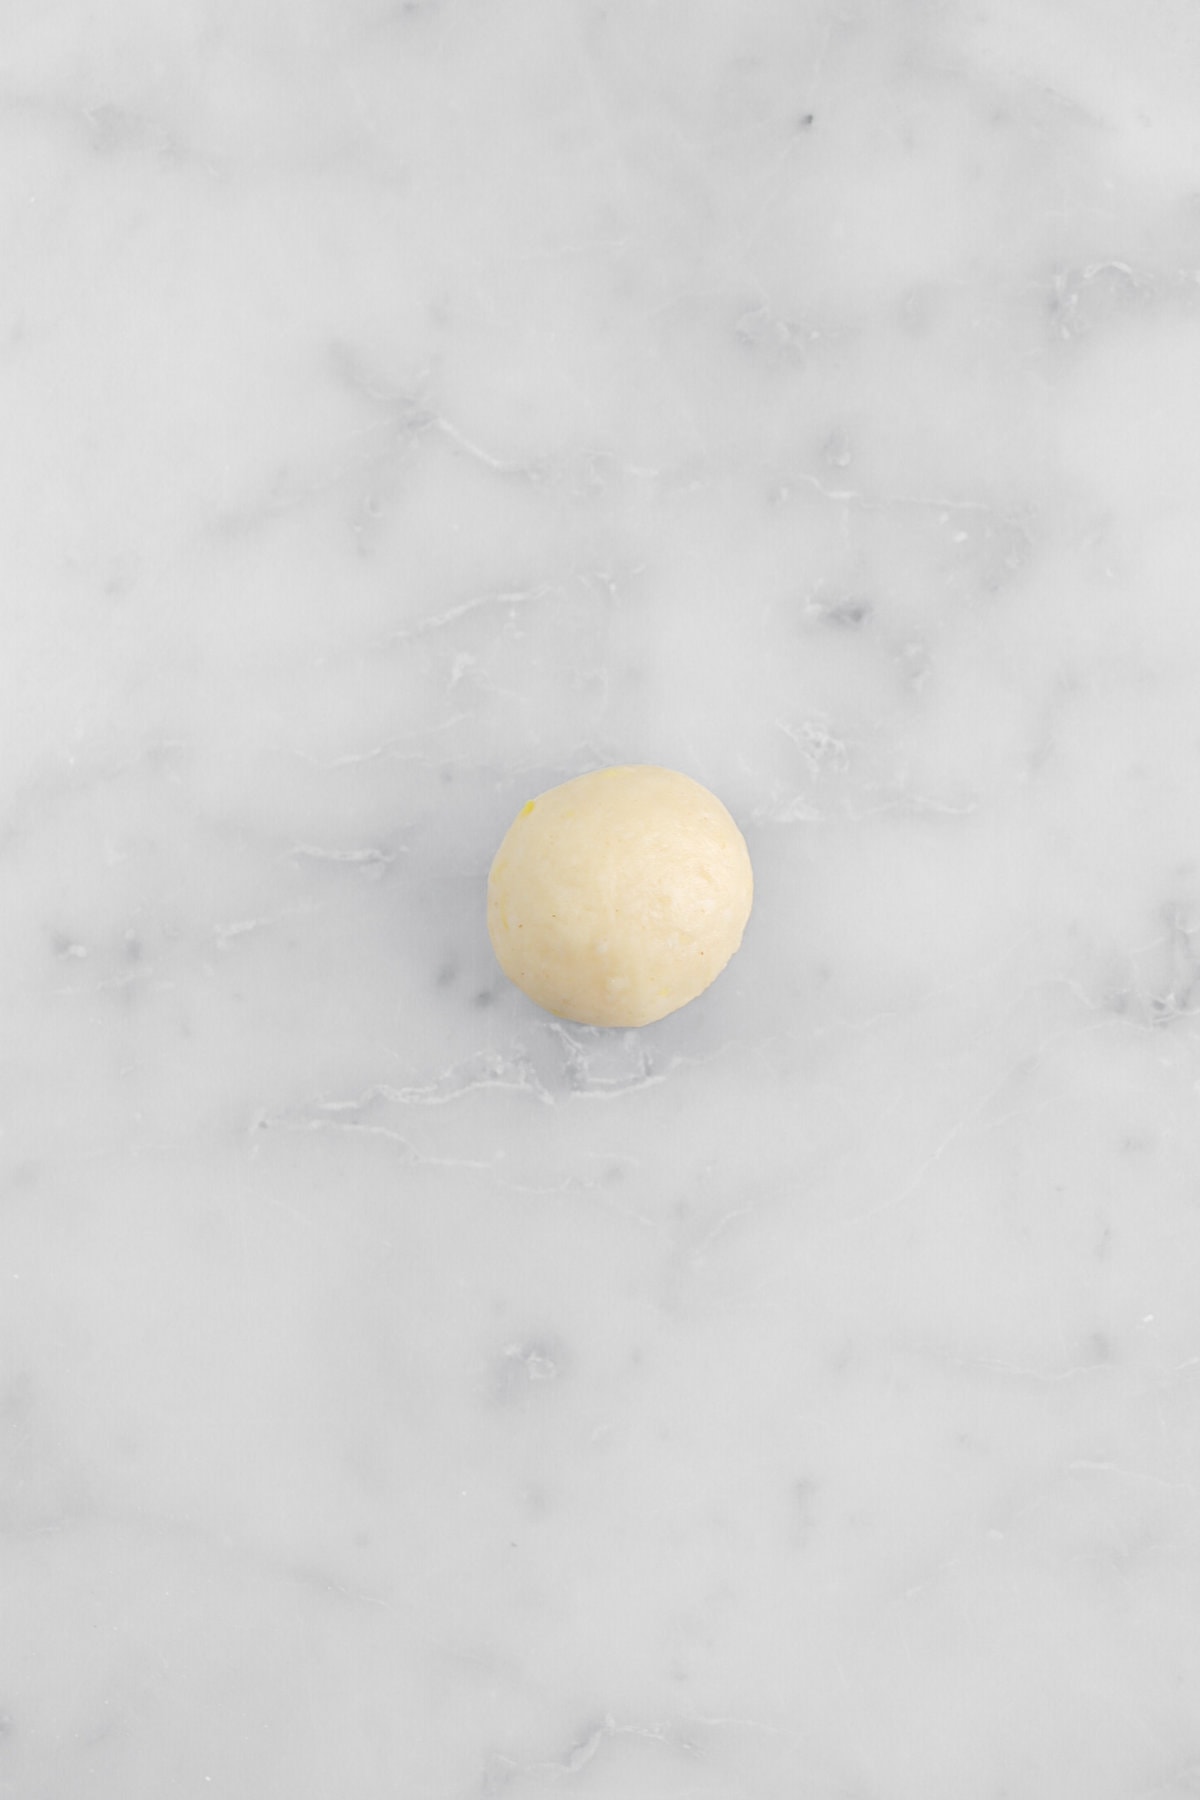 dough ball on marble surface.